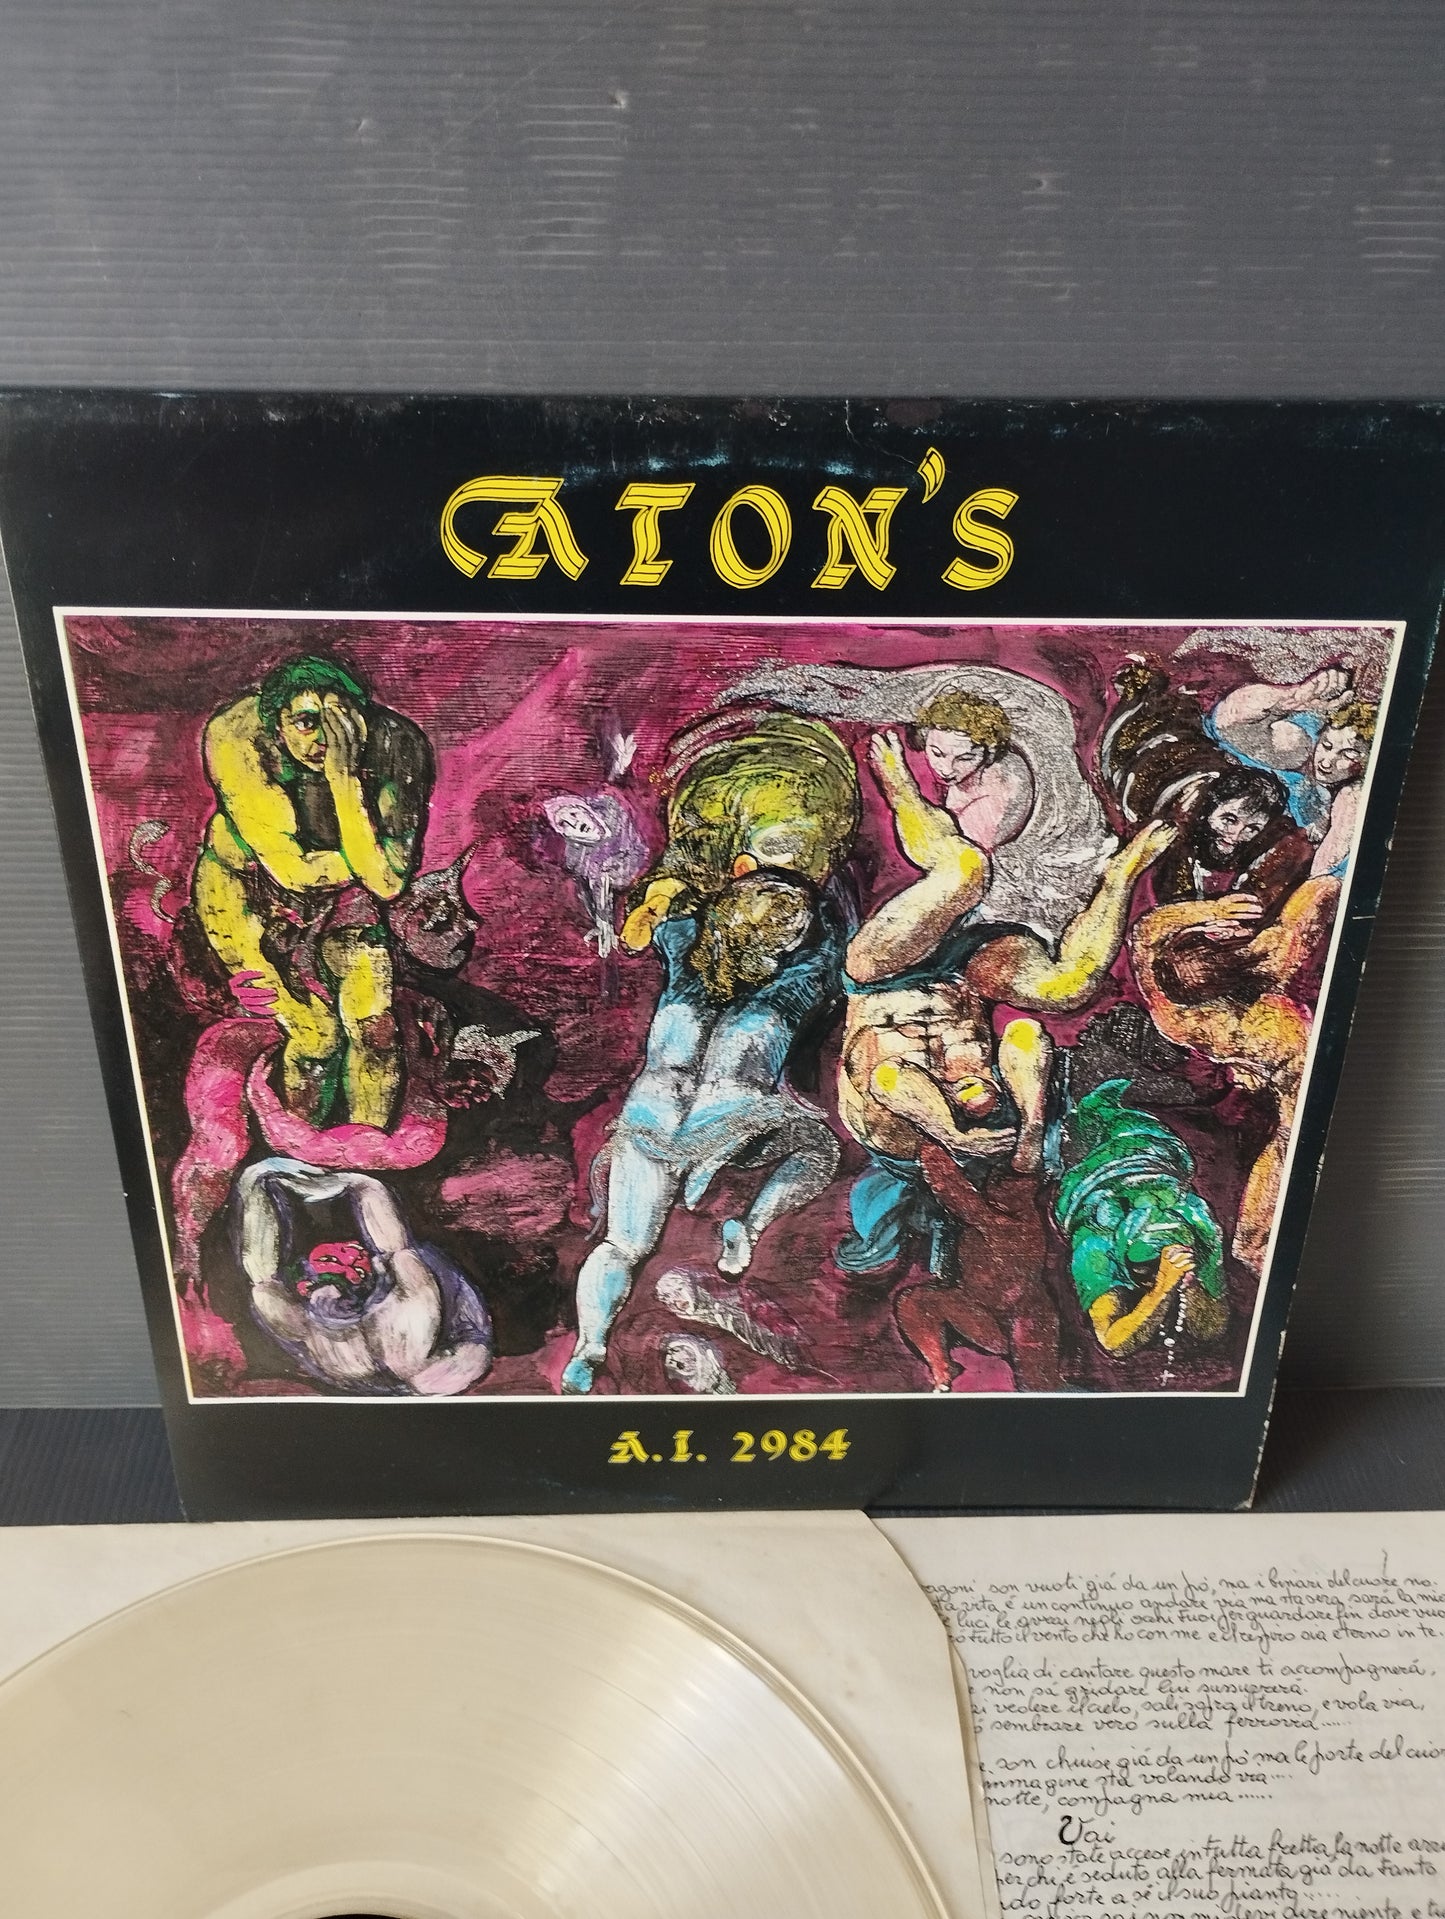 AI 2984" Aton's Lp 33 Giri

 Published in 1989 by ATS Records

 Clear vinyl